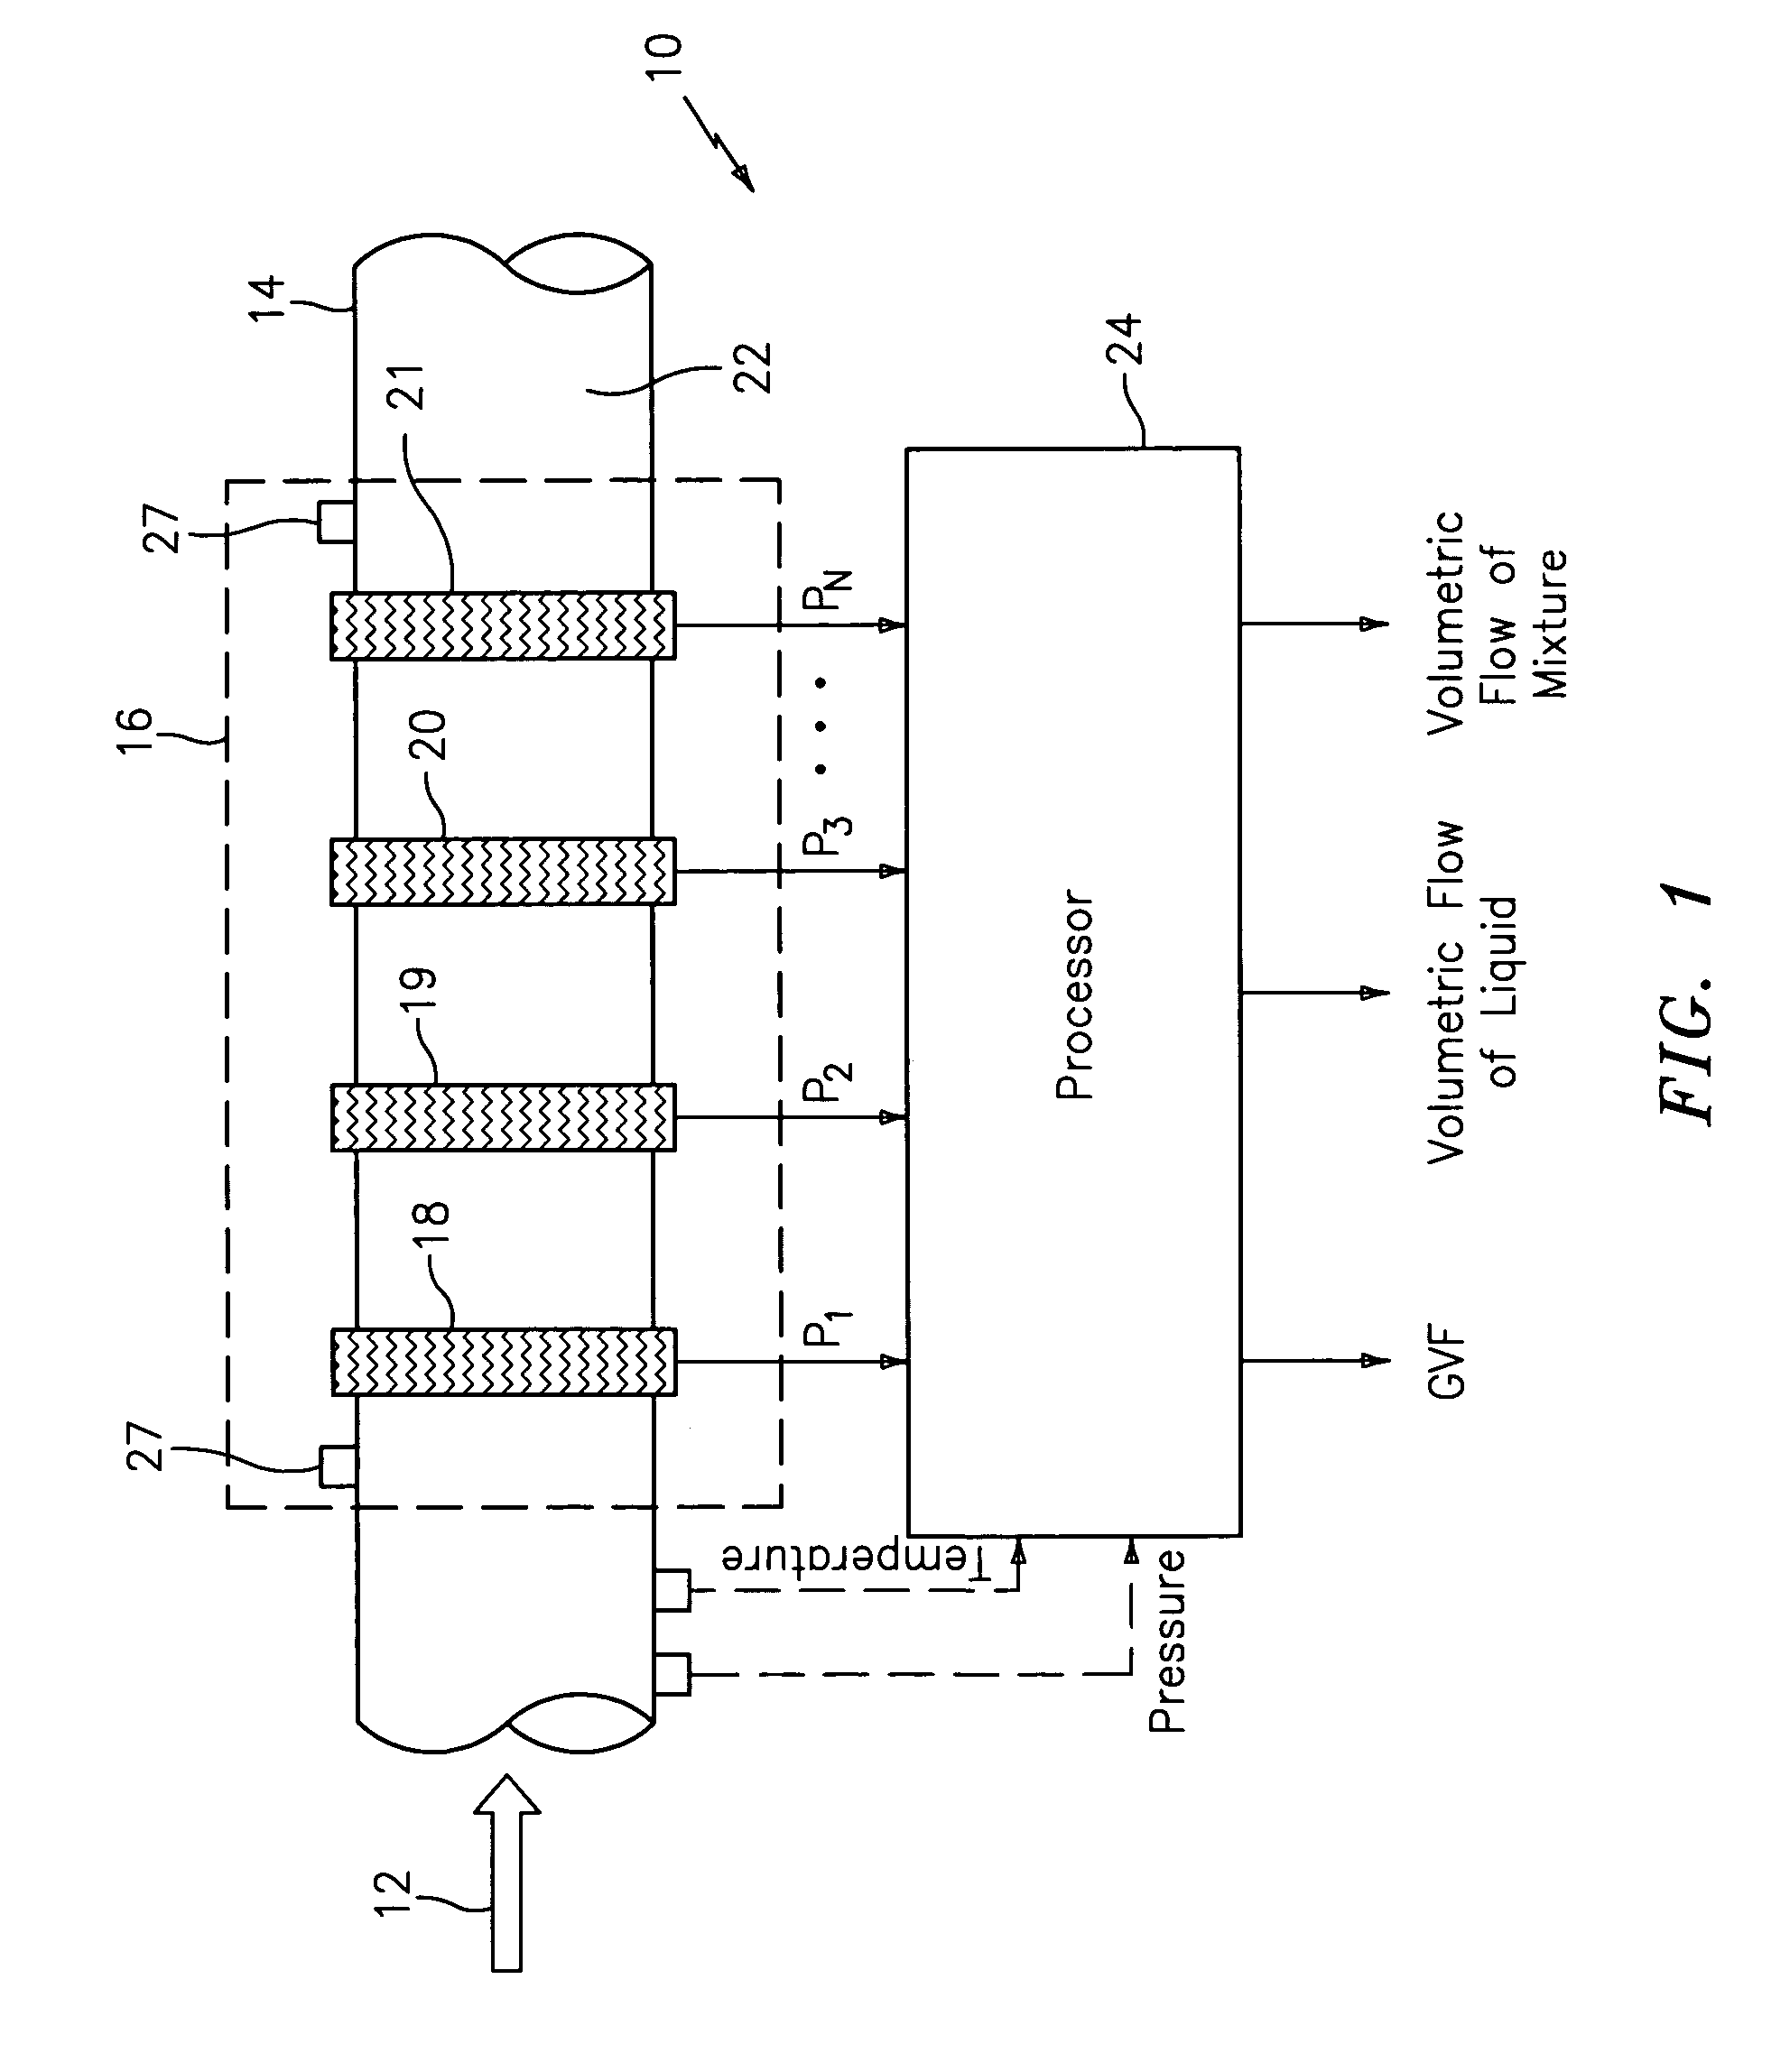 Apparatus and method for providing a flow measurement compensated for entrained gas